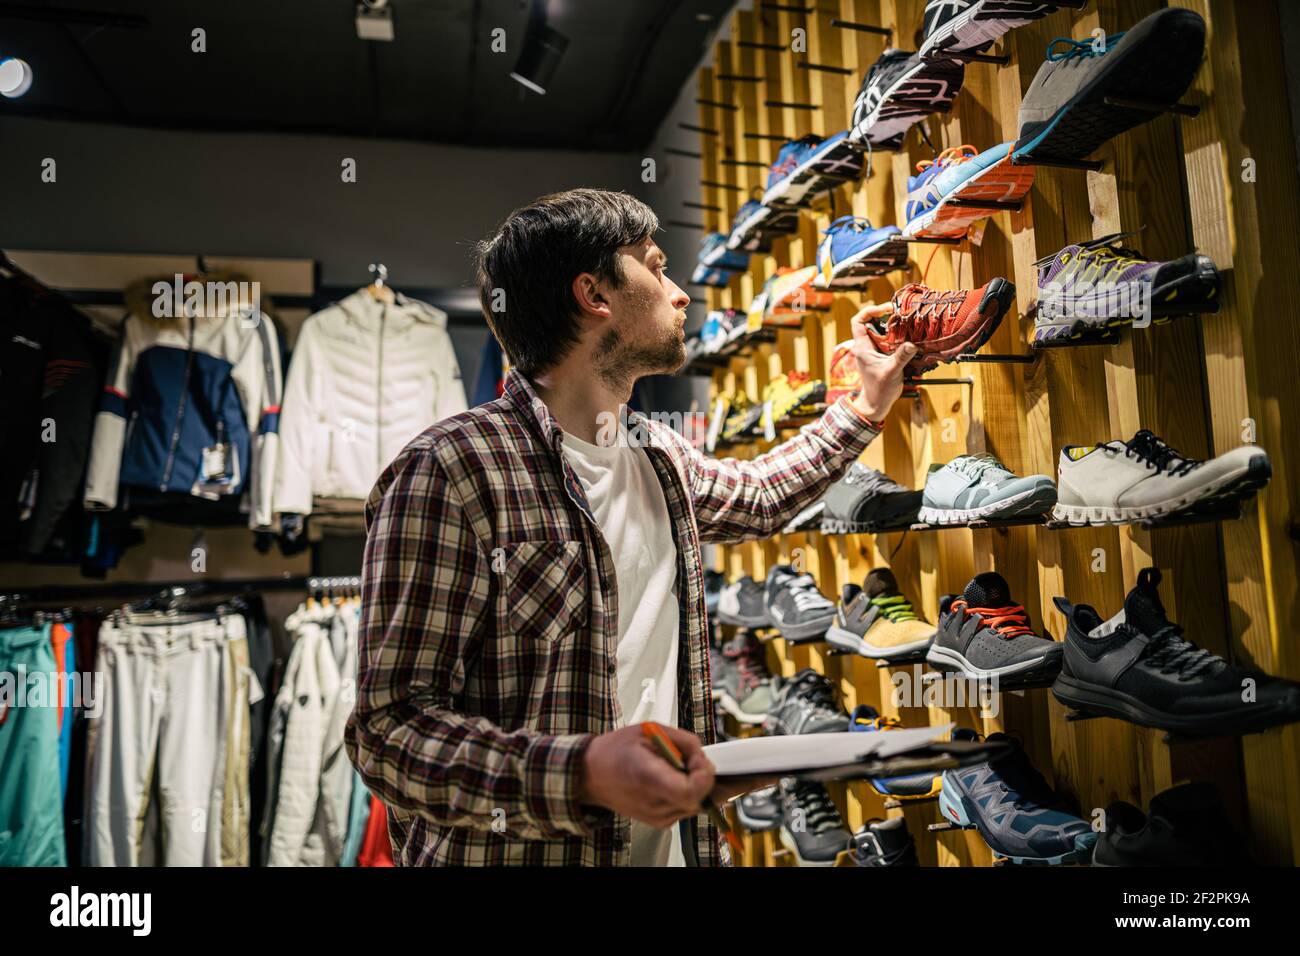 Man Shoe Shop Assistant High Resolution Stock Photography and Images - Alamy